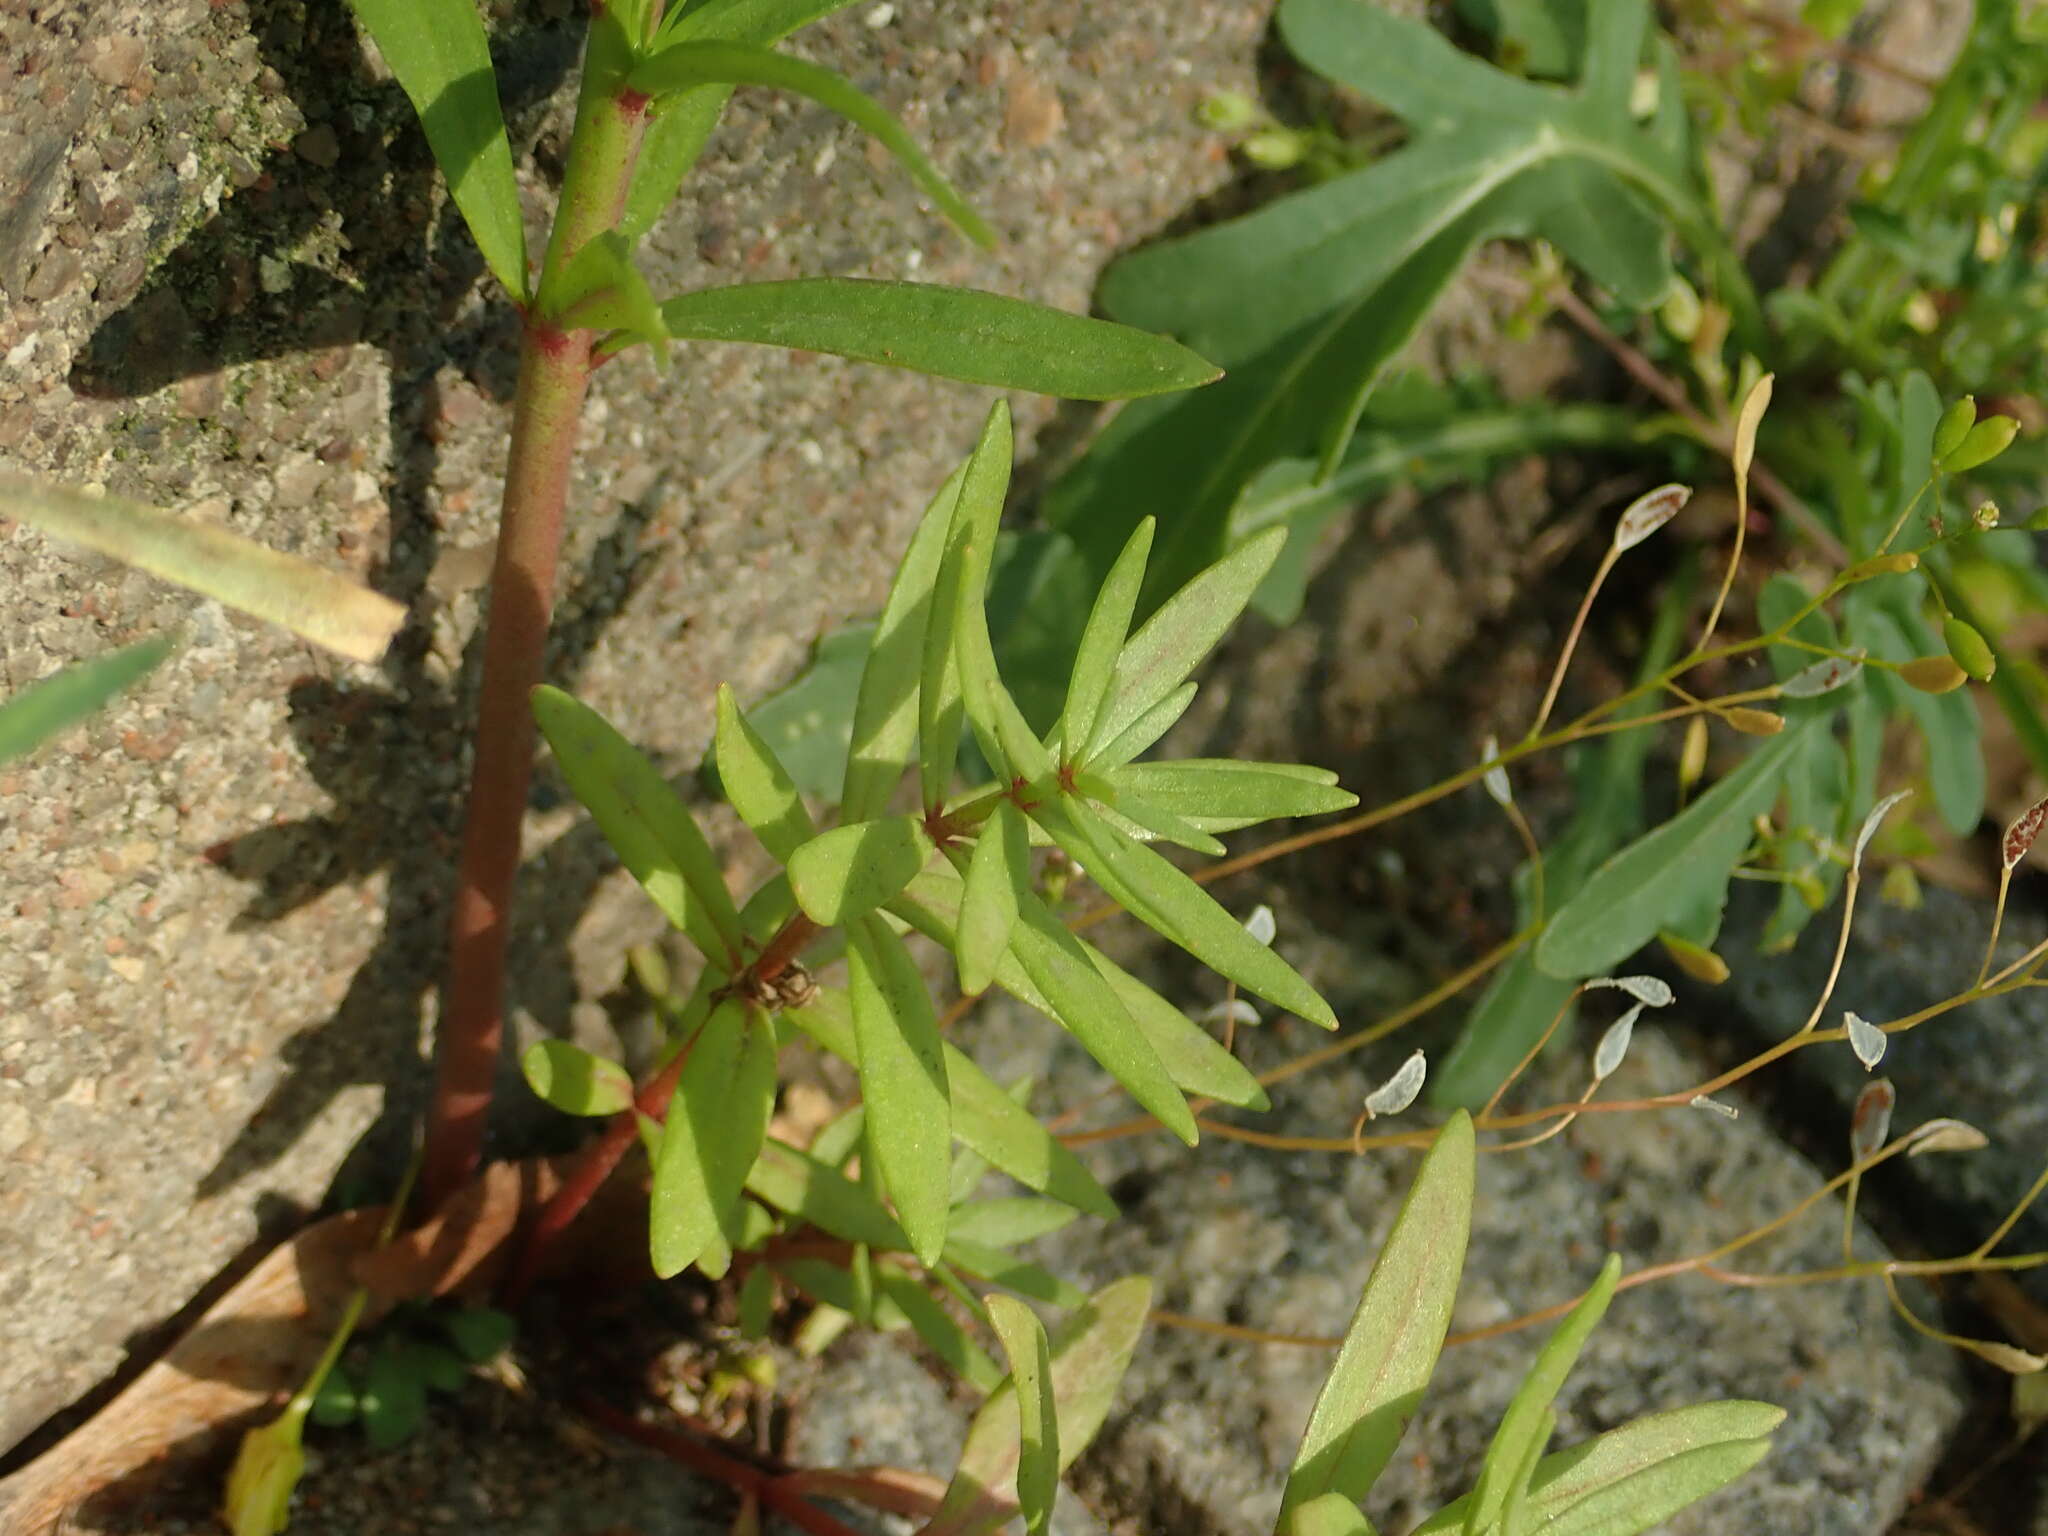 Image of Moroccan toadflax